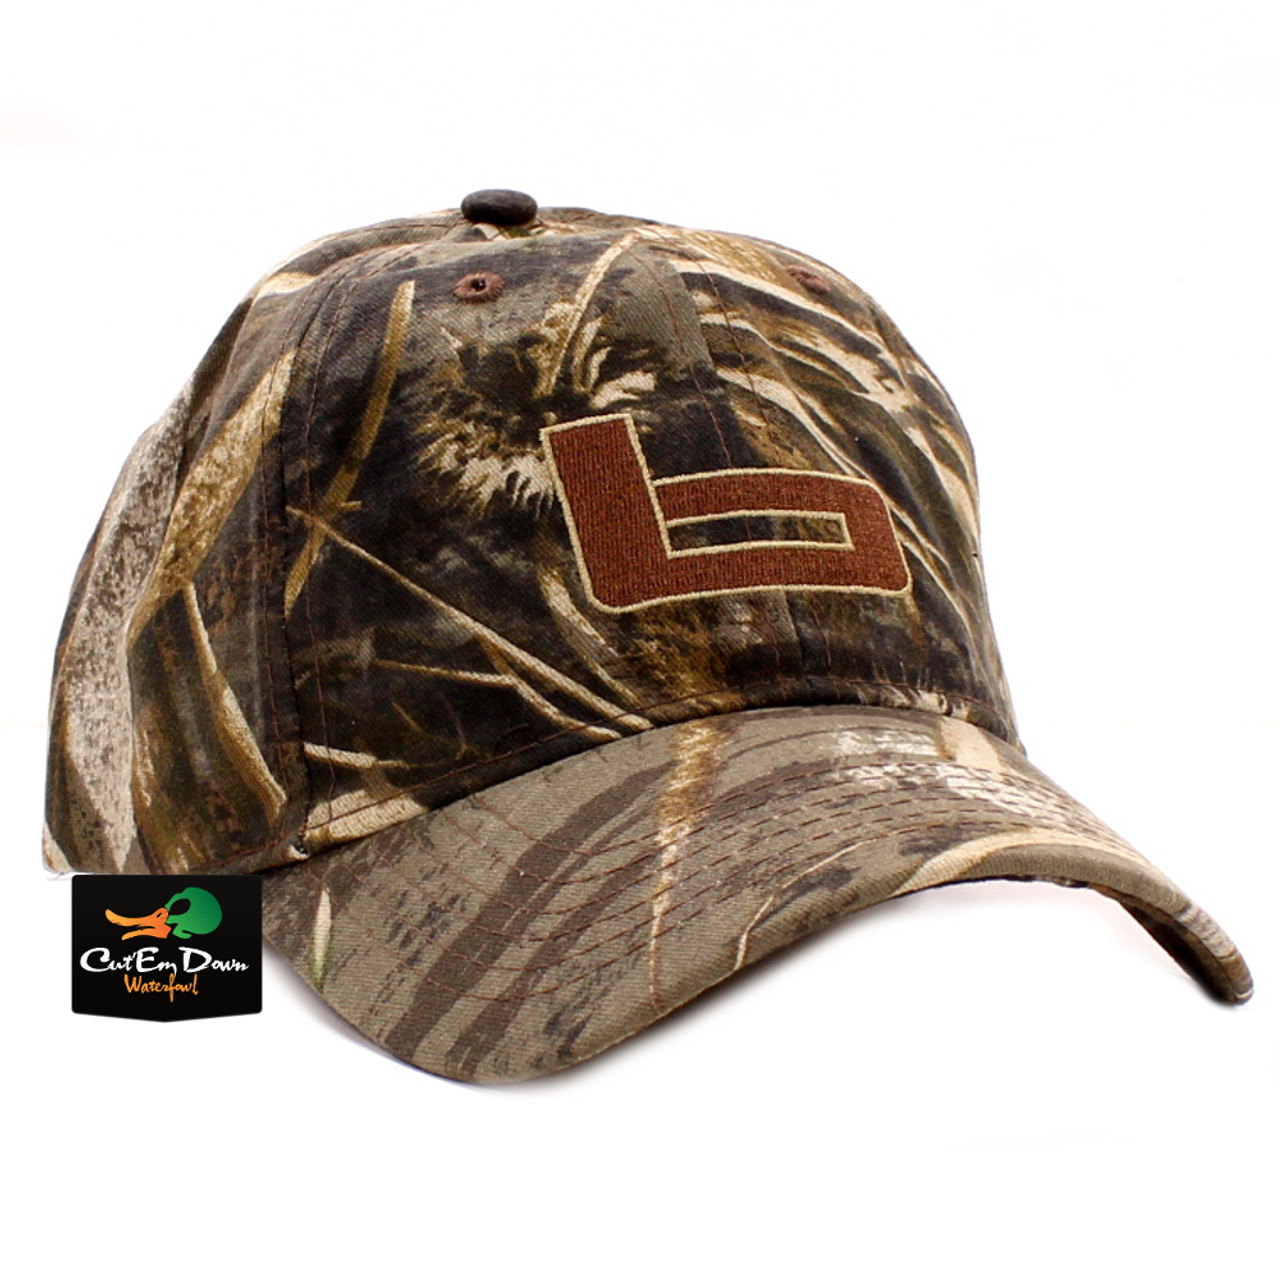 Banded Camo Cap - Realtree Timber - Dance's Sporting Goods